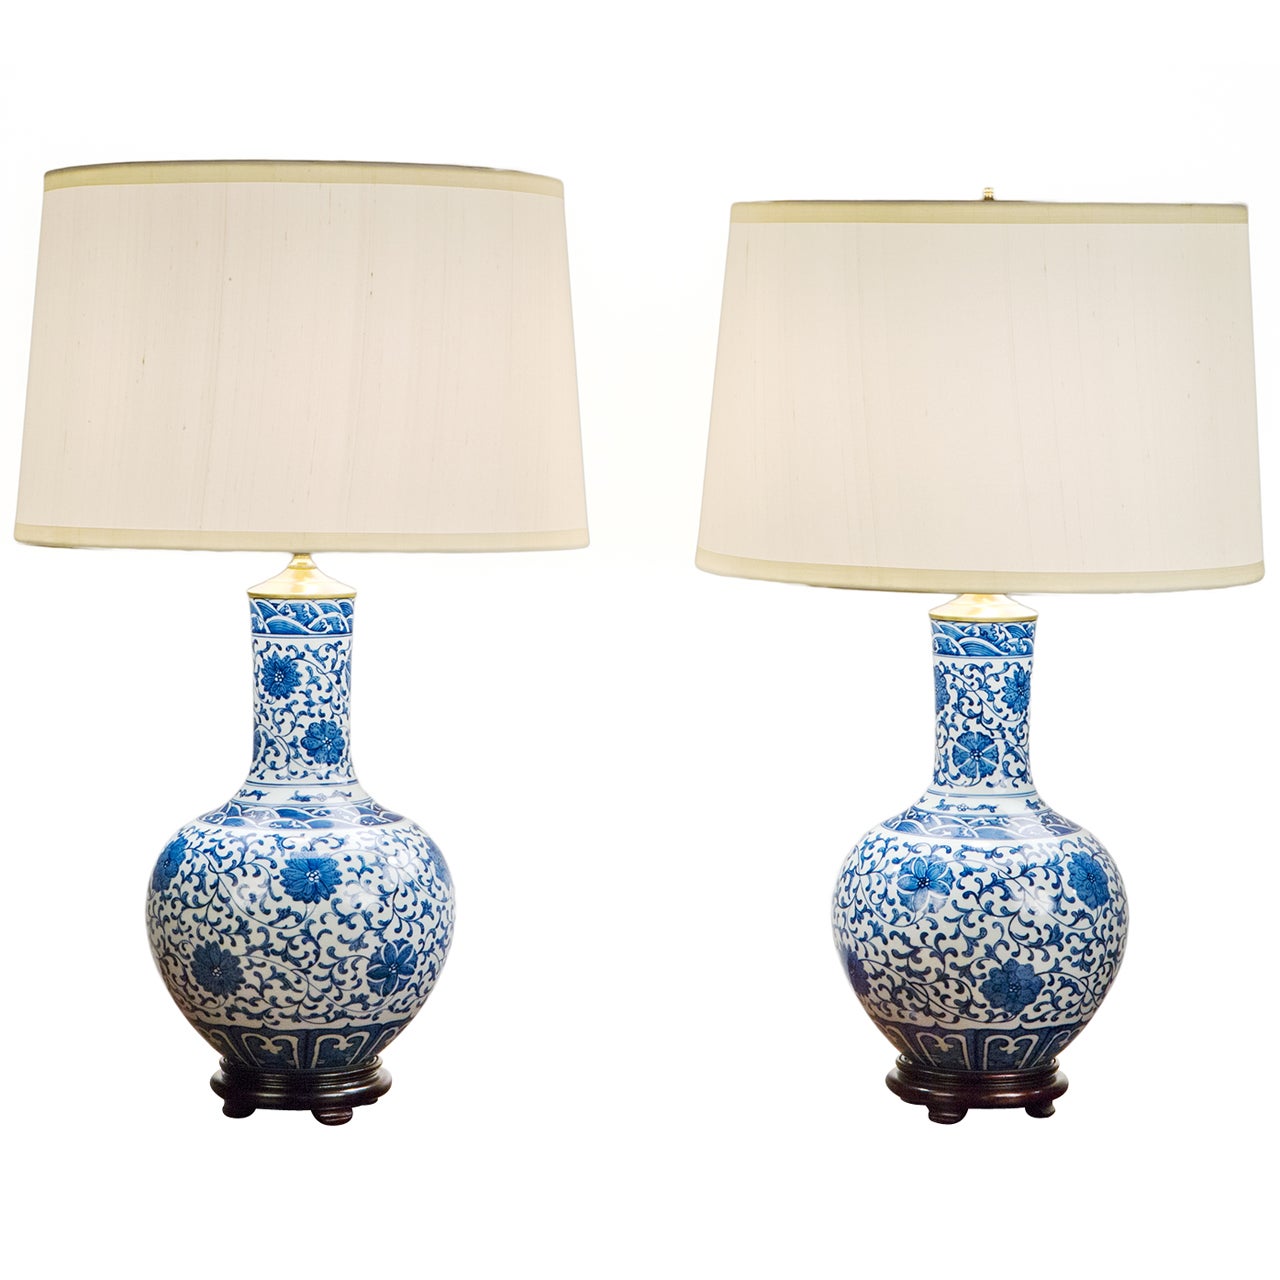 Pair of 20th Century Chinese Blue and White Porcelain Globular Lamps